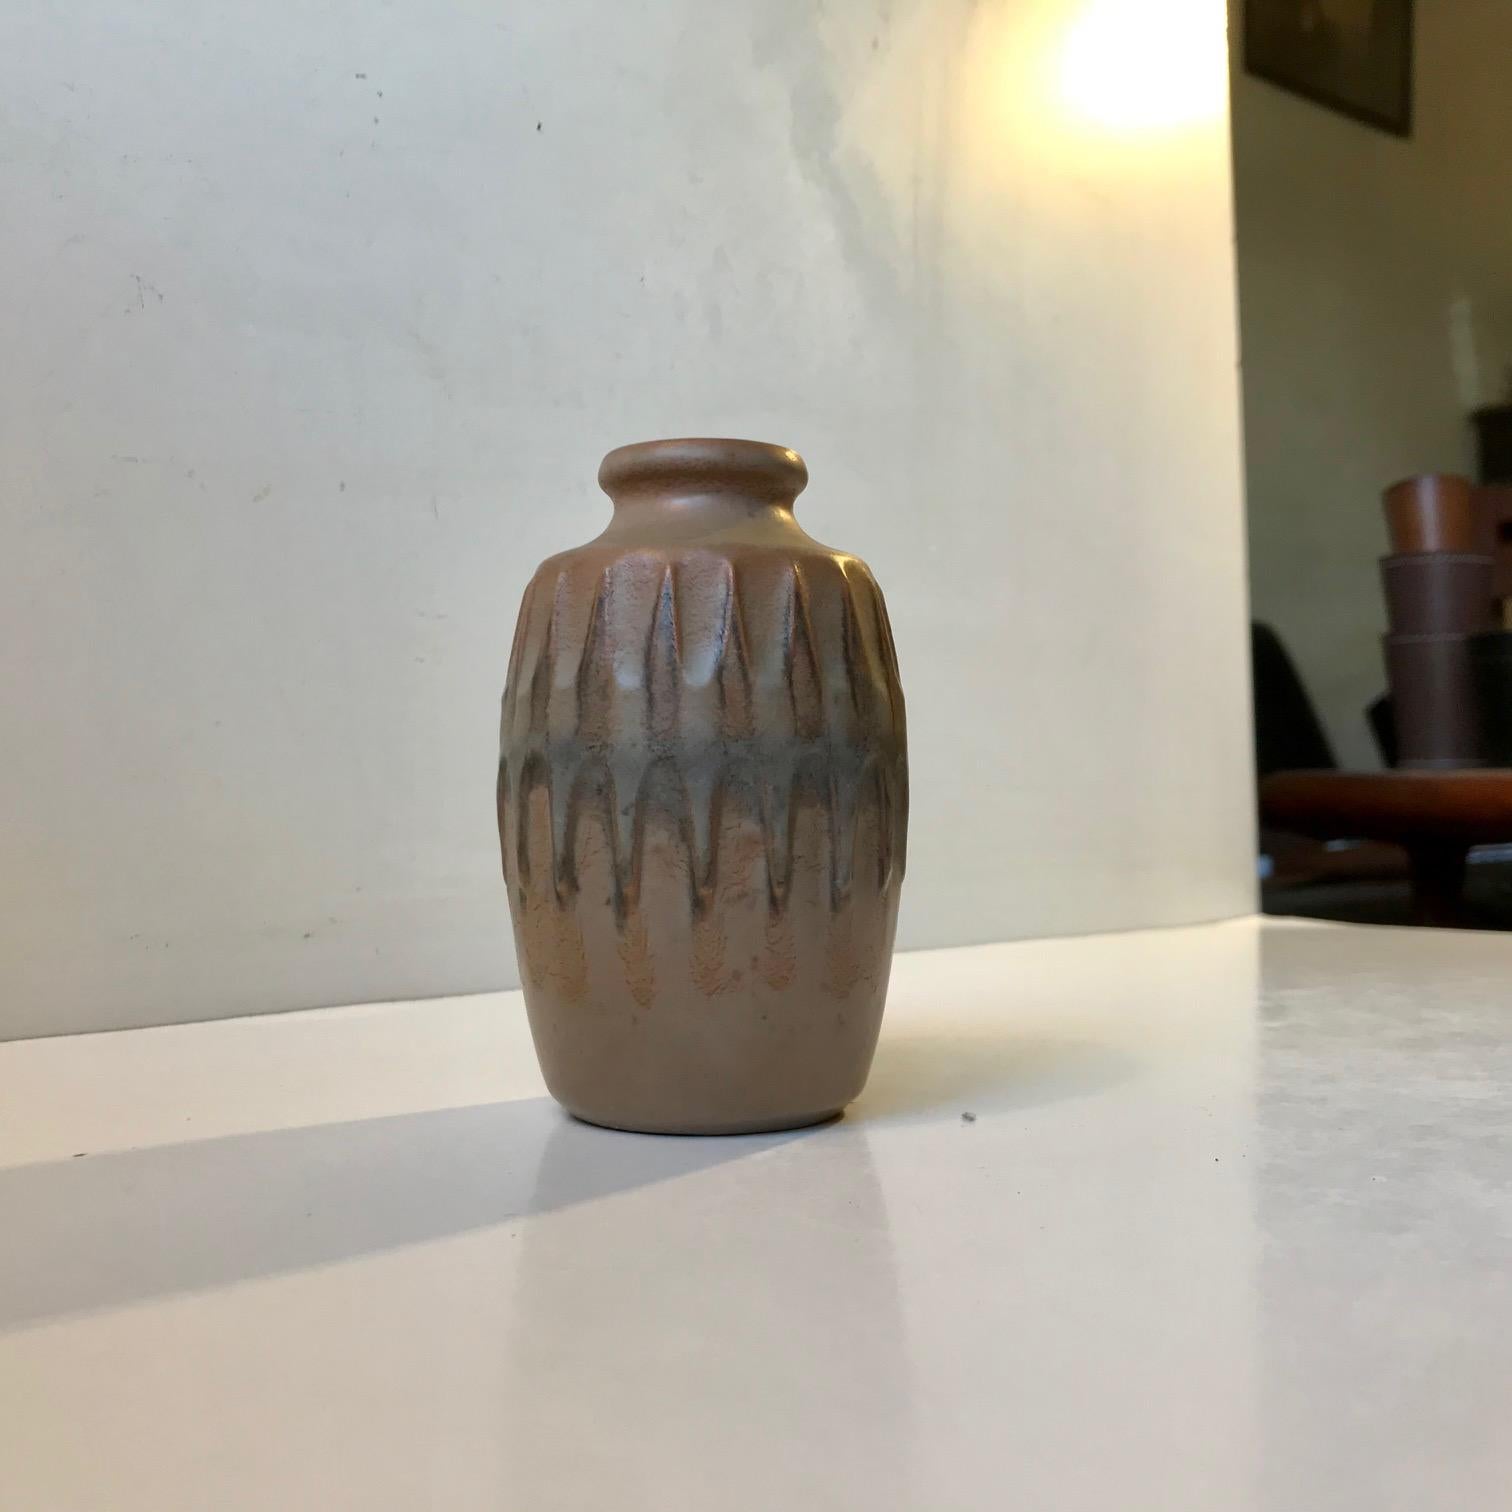 Ceramic vase with subtle/semi-matté camouflage glazes designed by the Austrian Ceramist Günther Praschak who worked at knabstrup in Denmark from 1964-69. It features af center decor in relief micmicking a heart diagram. This piece dates from the